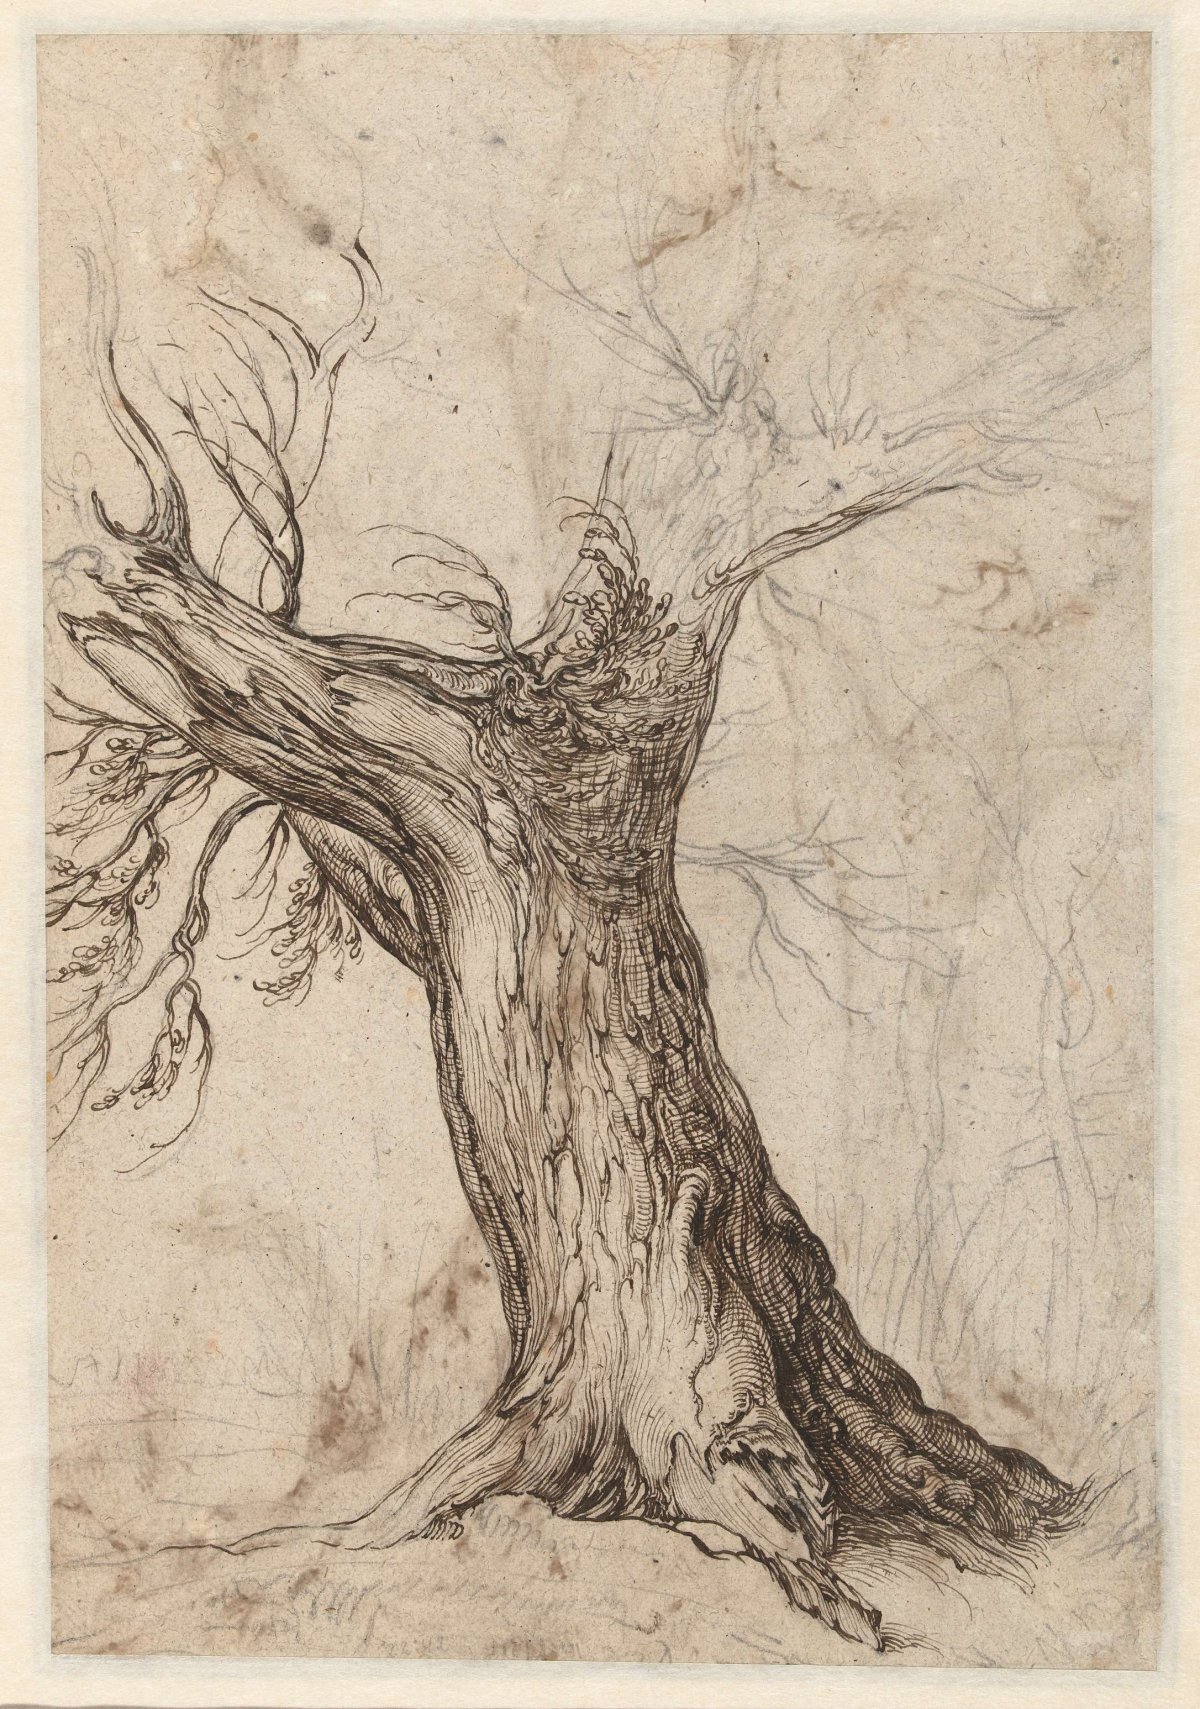 Chestnut tree with some trees around it, Jacques de Gheyn (II), 1598 - 1608